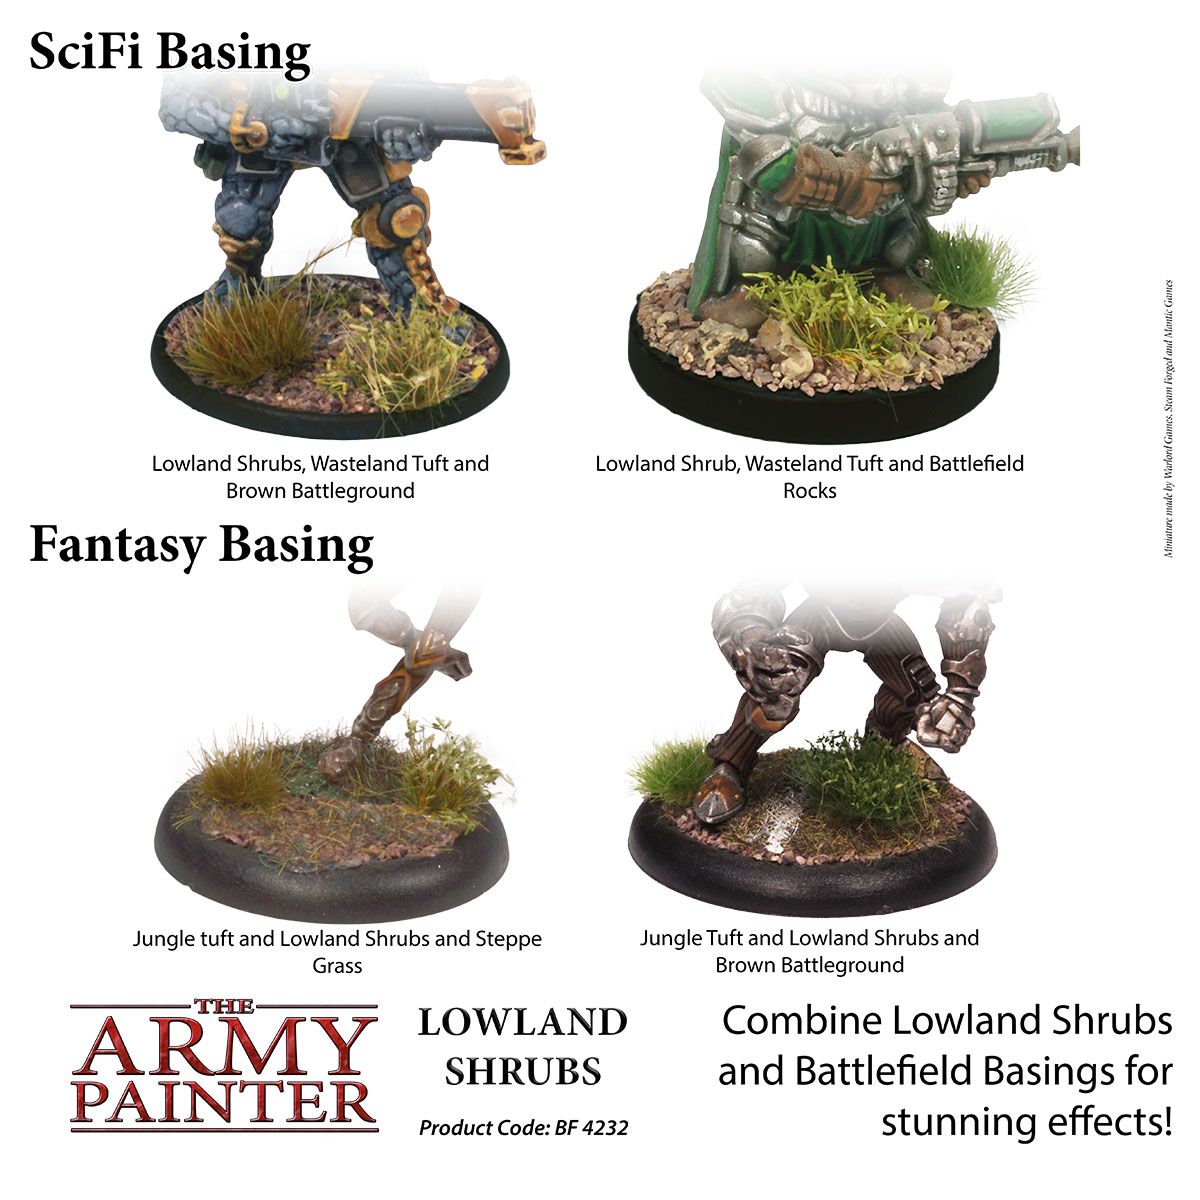 Lowland Shrubs (The Army Painter)